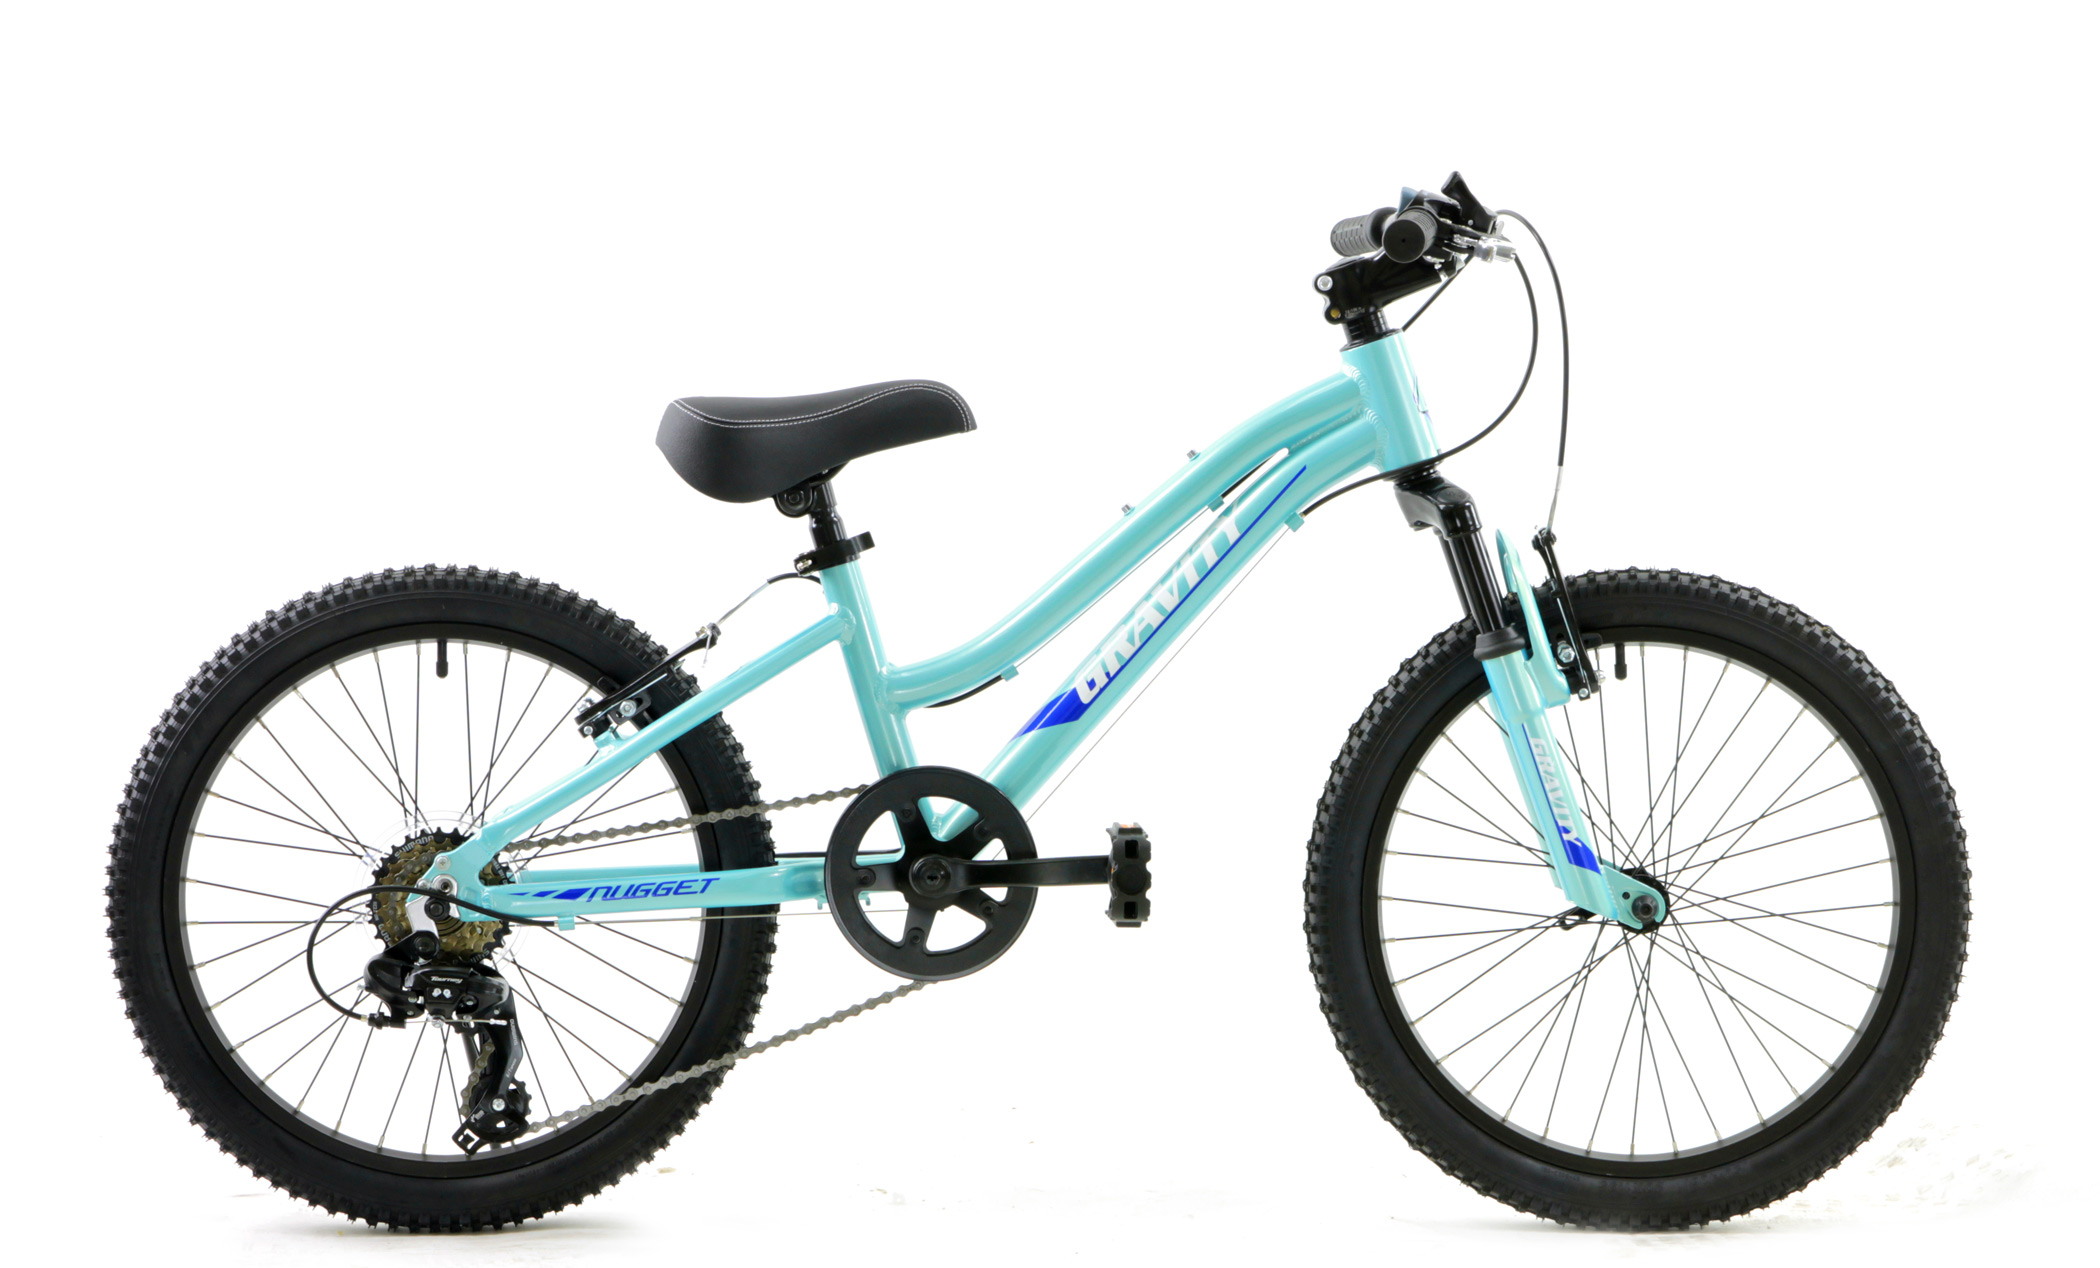 Bikes-New Gravity Nugget 20 Shimano Multi Speed Front Suspension Kids Mountain Bikes for Lil' Riders Image